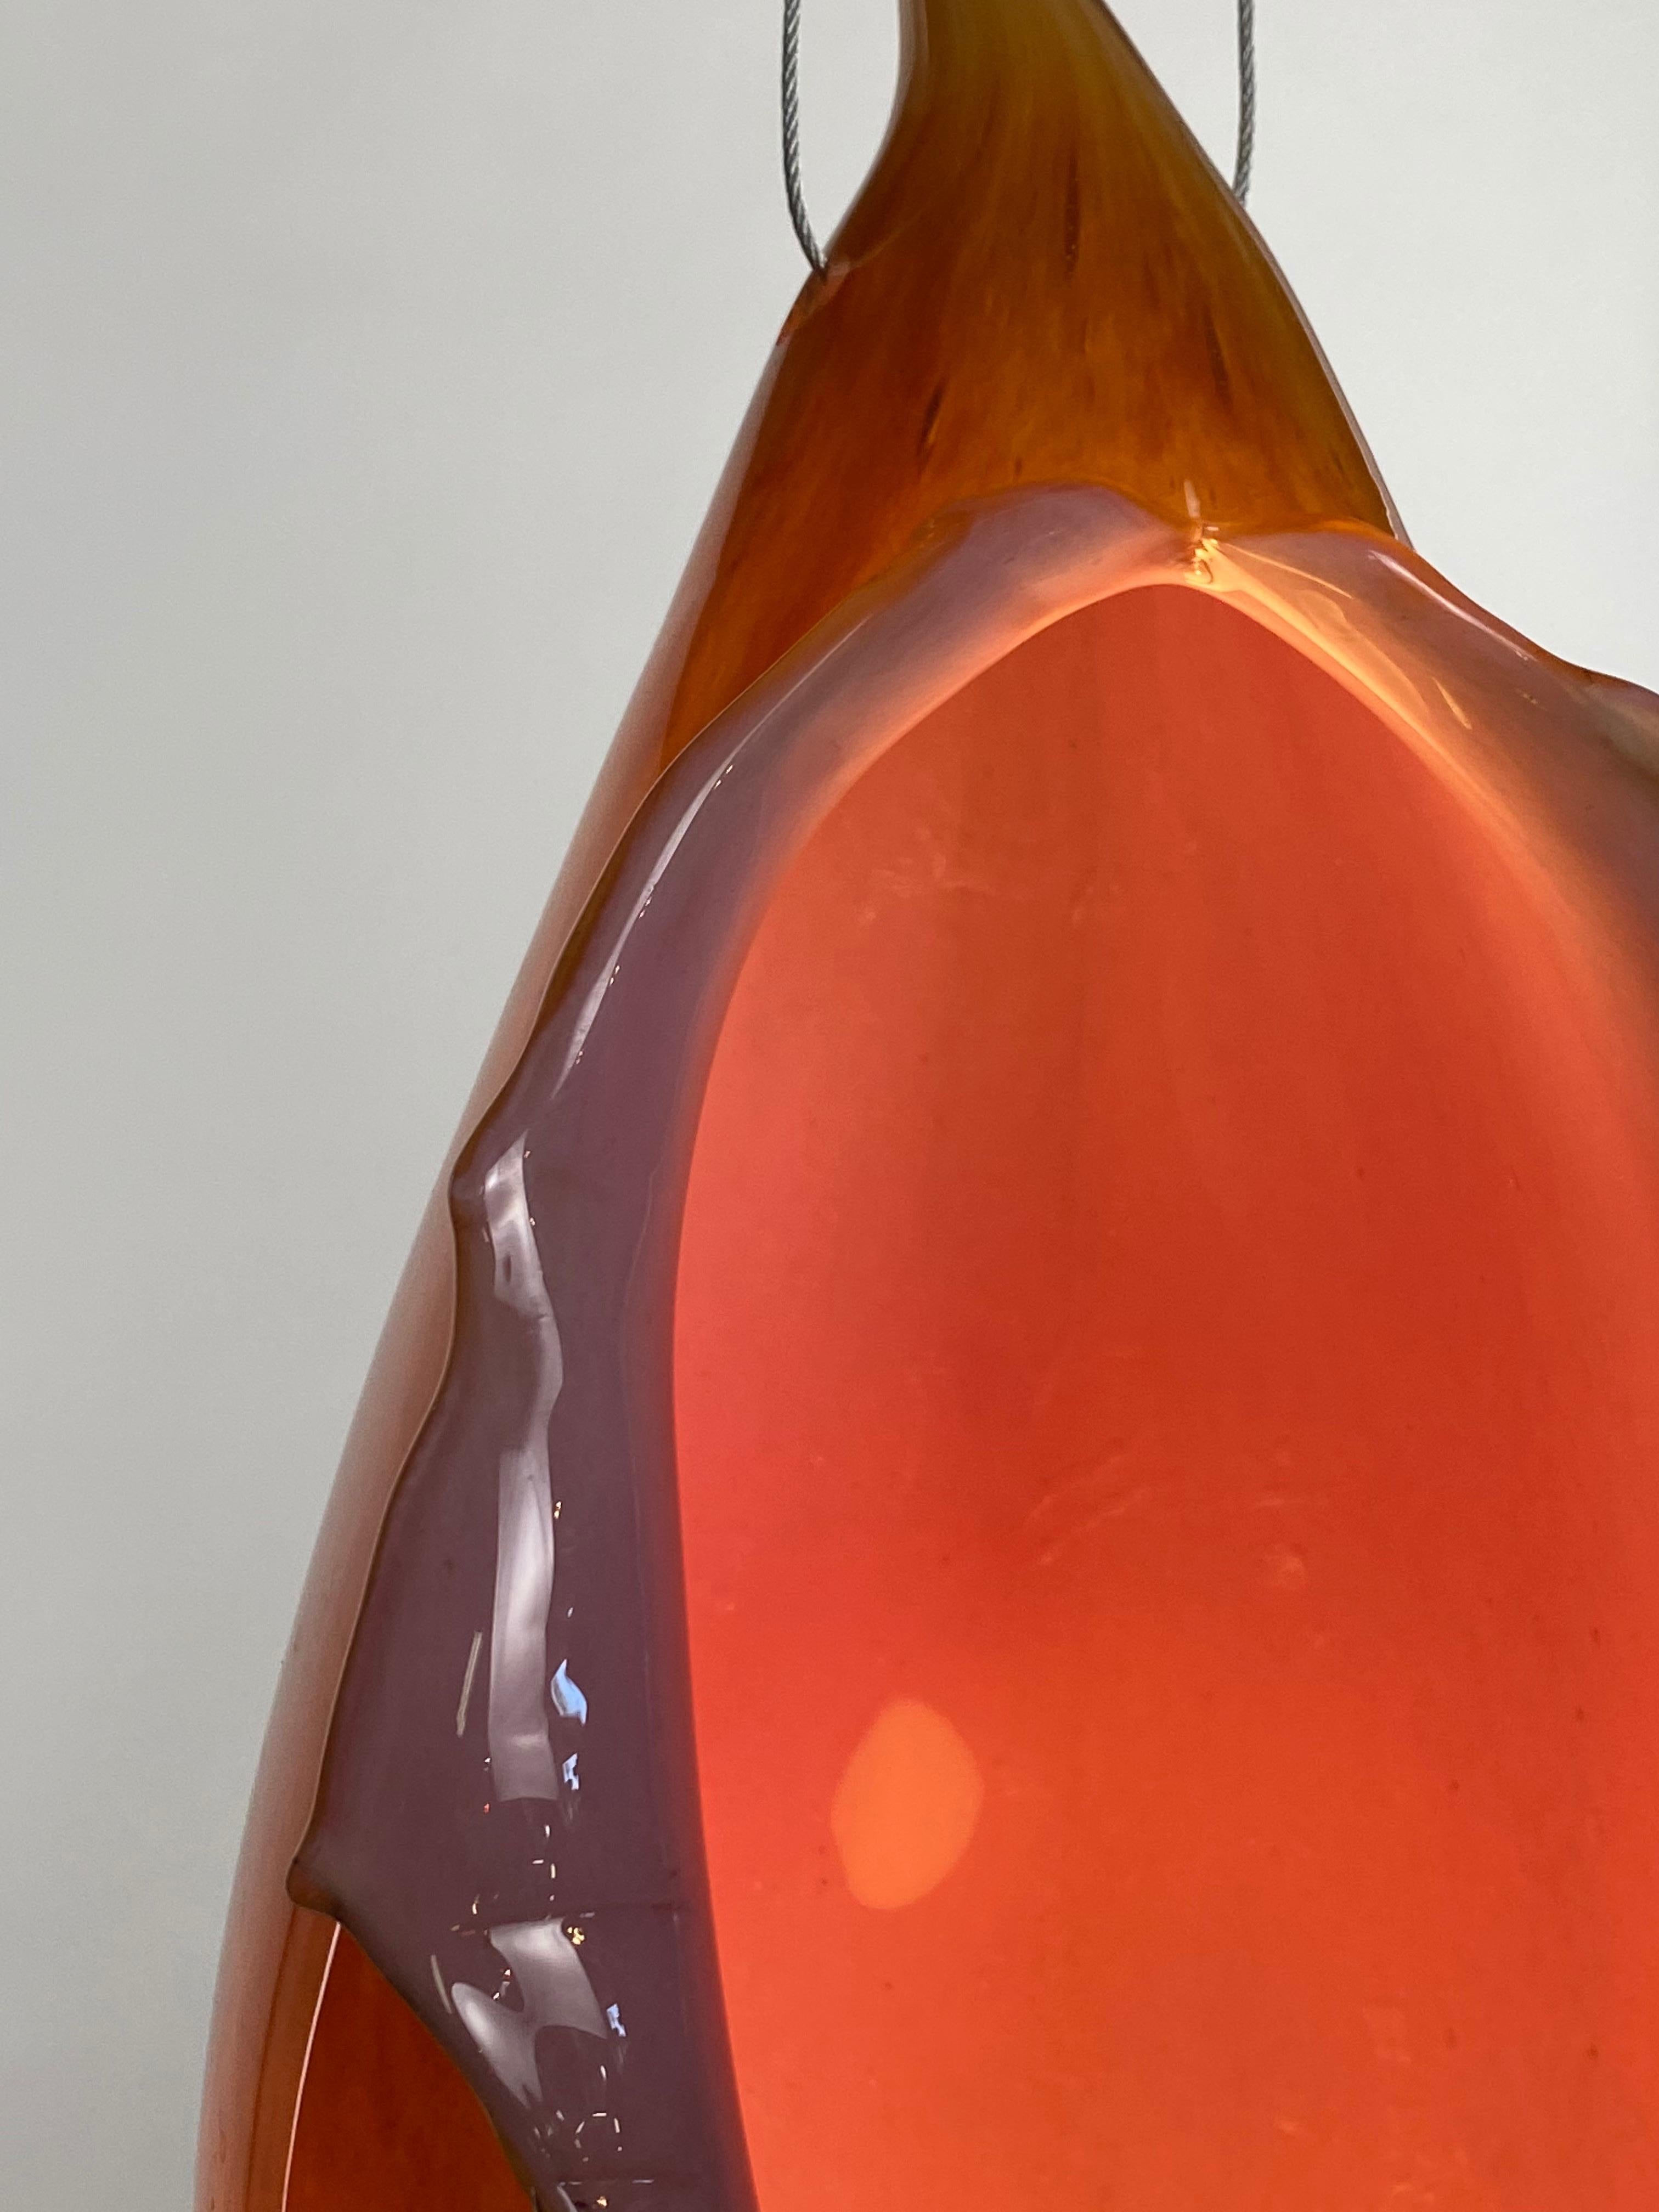 Blown Glass Pink and Orange Lamp Pendent Light, 21st Century by Mattia Biagi In New Condition For Sale In Culver City, CA